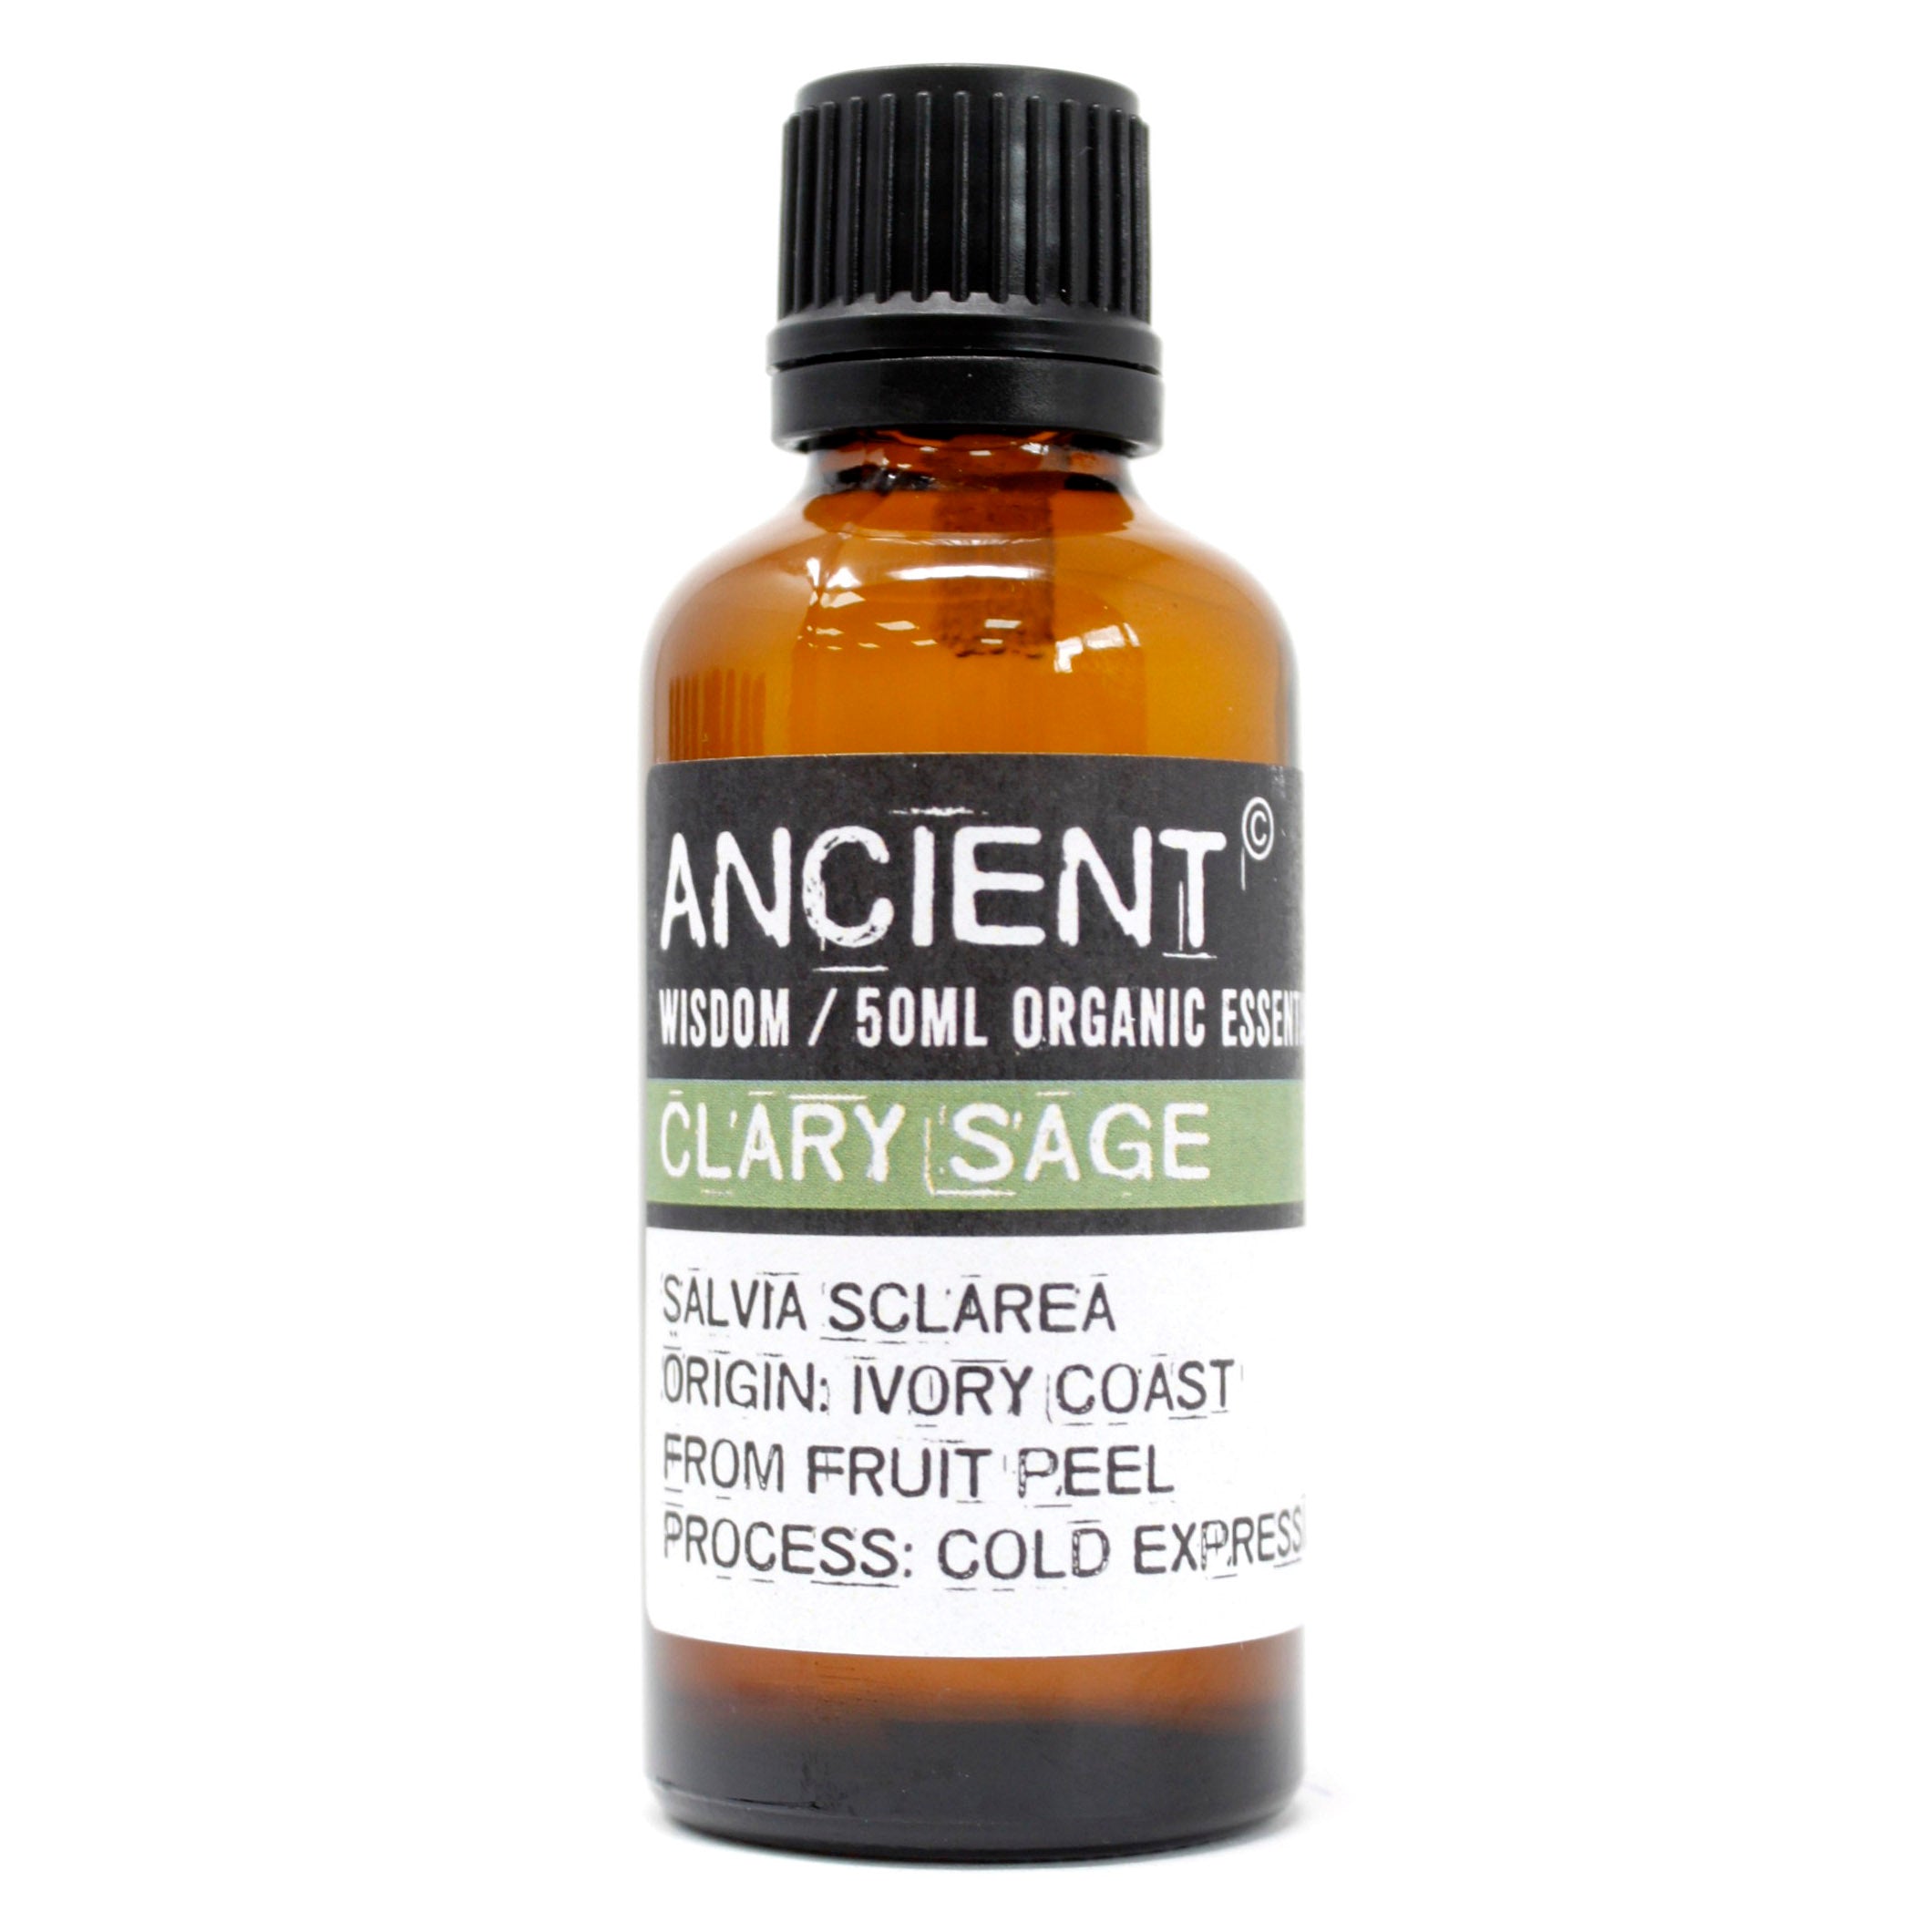 View Clary Sage Organic Essential Oil 50ml information